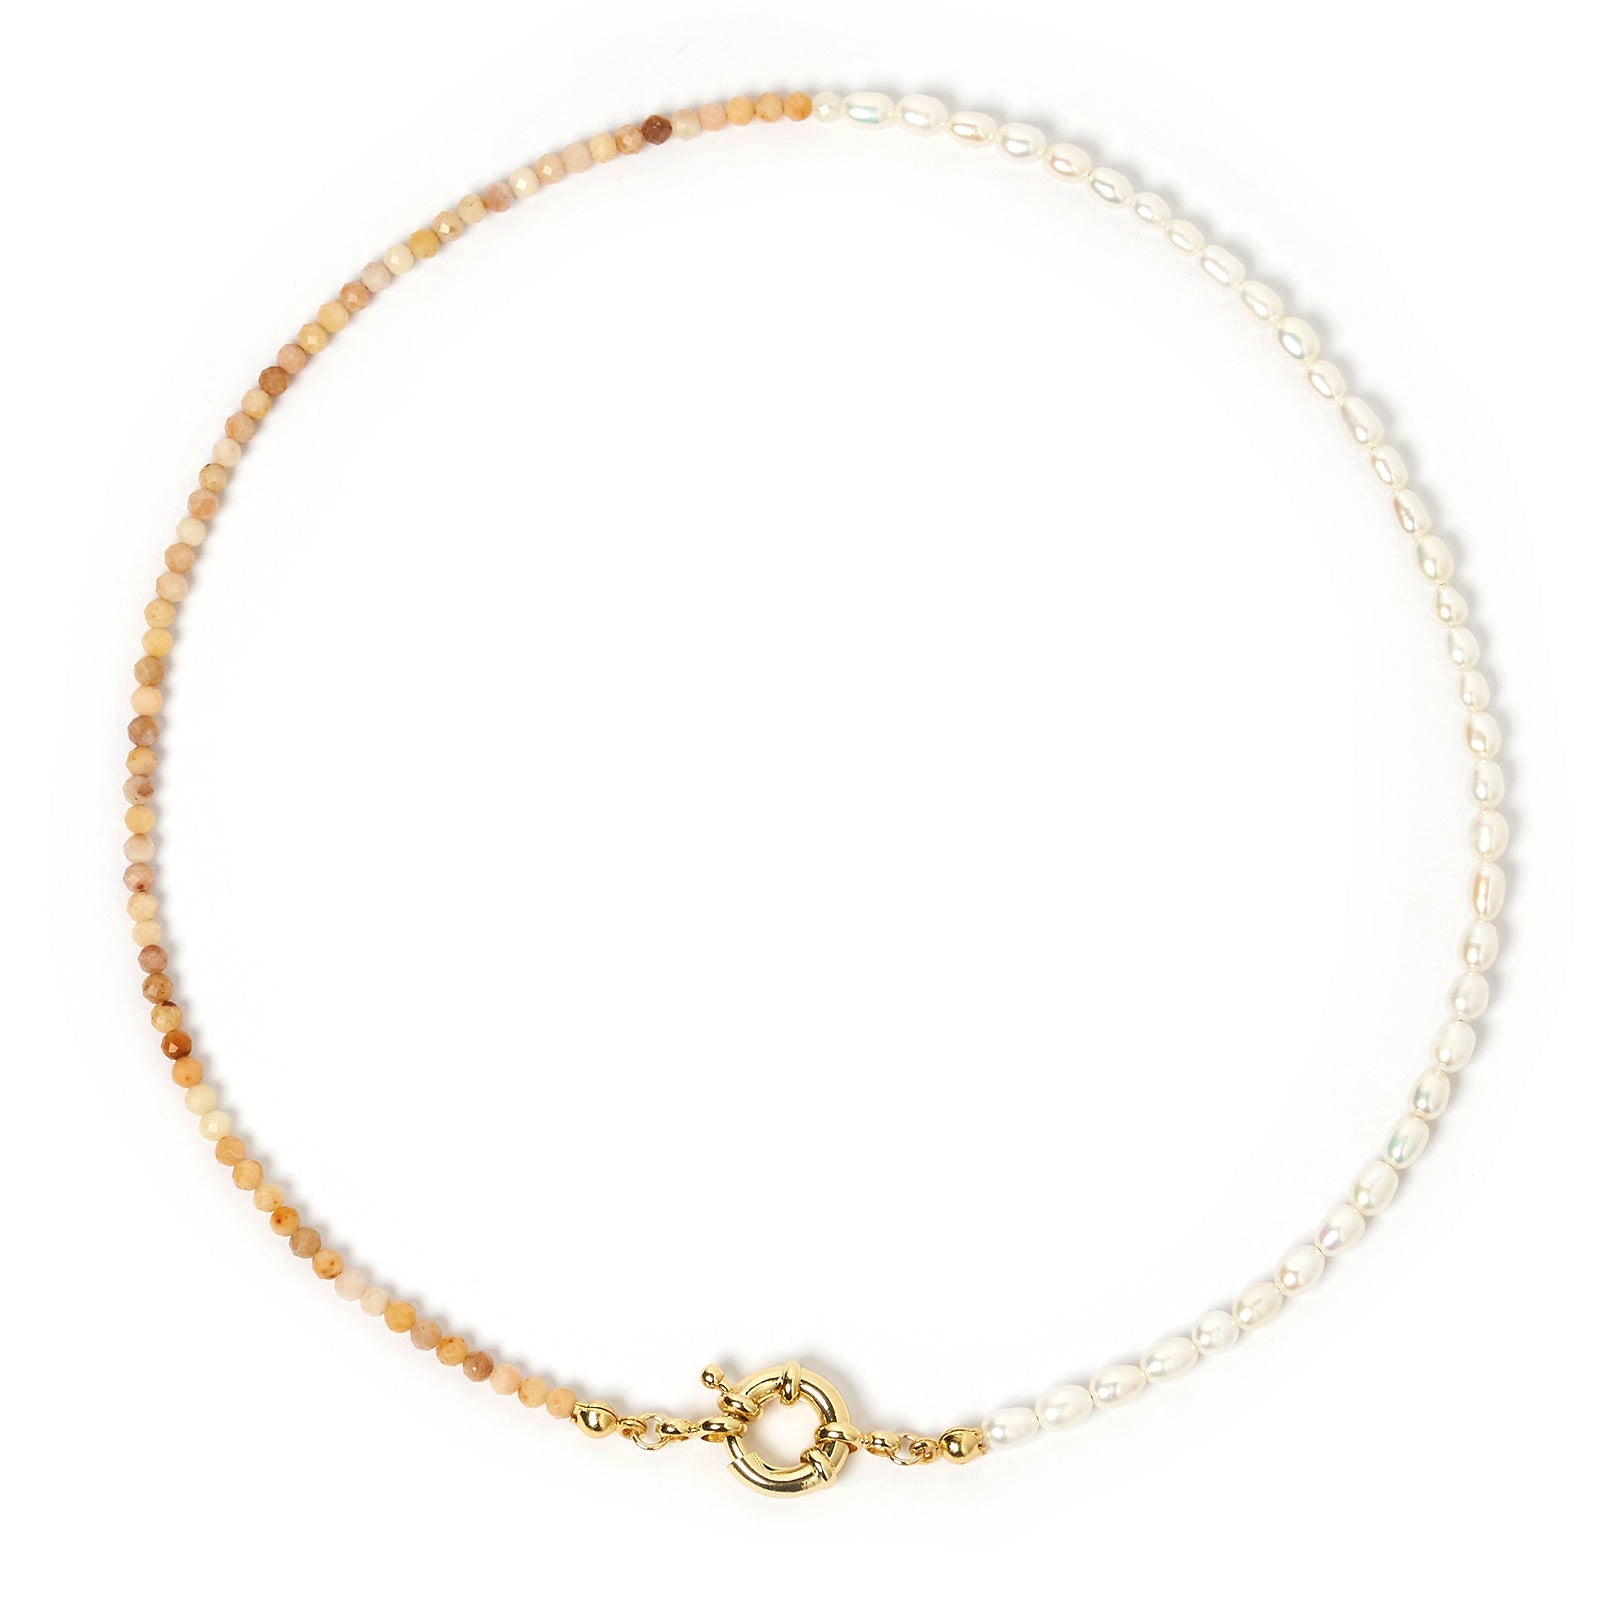 Arms of Eve Suri Pearl and Gemstone Necklace - Cream Coralite